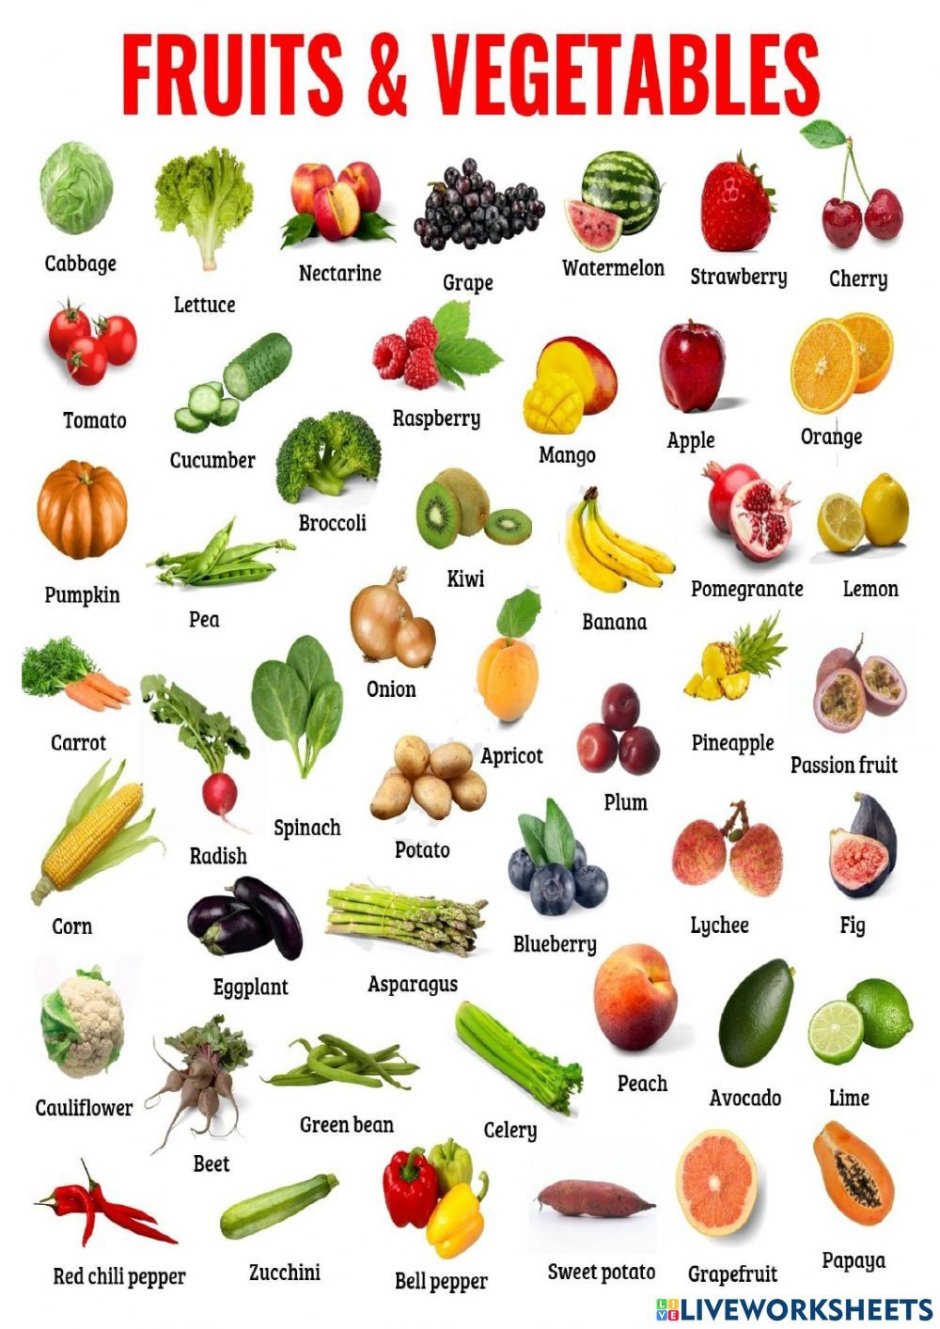 Fruits and Vegetables names